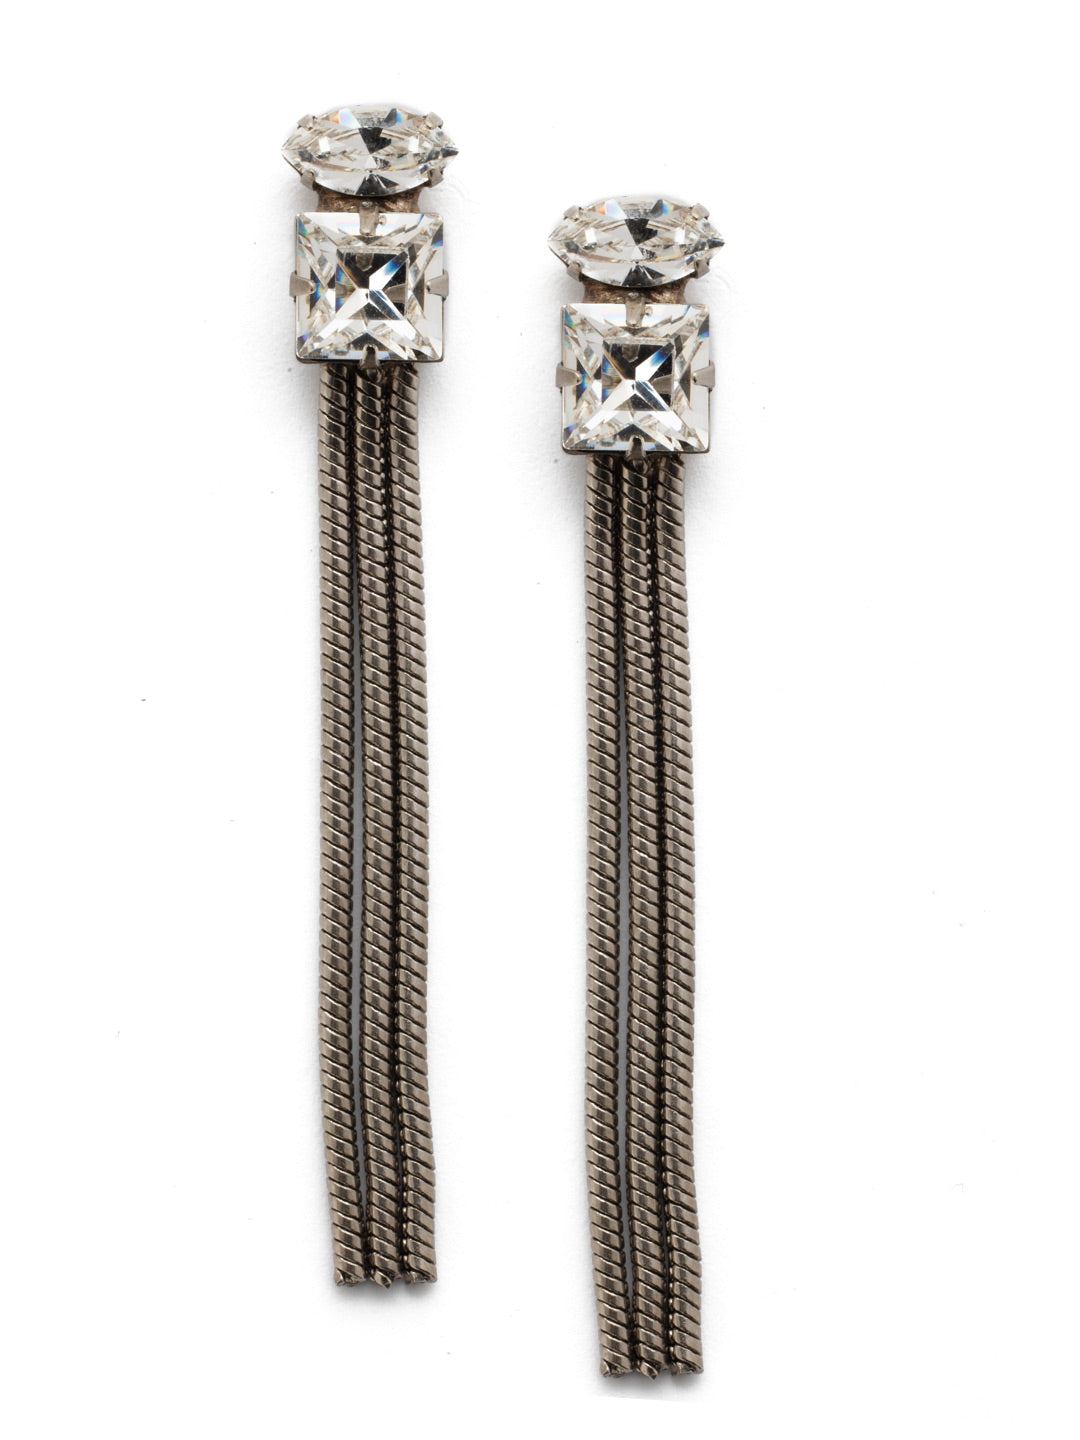 Avena Statement Earrings - 4EEP37ASCRY - <p>Our Avena Statement Dangle Earrings are long on style. Navette and square antique crystals pair with edgy metal strands for sparkle and fun. From Sorrelli's Crystal collection in our Antique Silver-tone finish.</p>